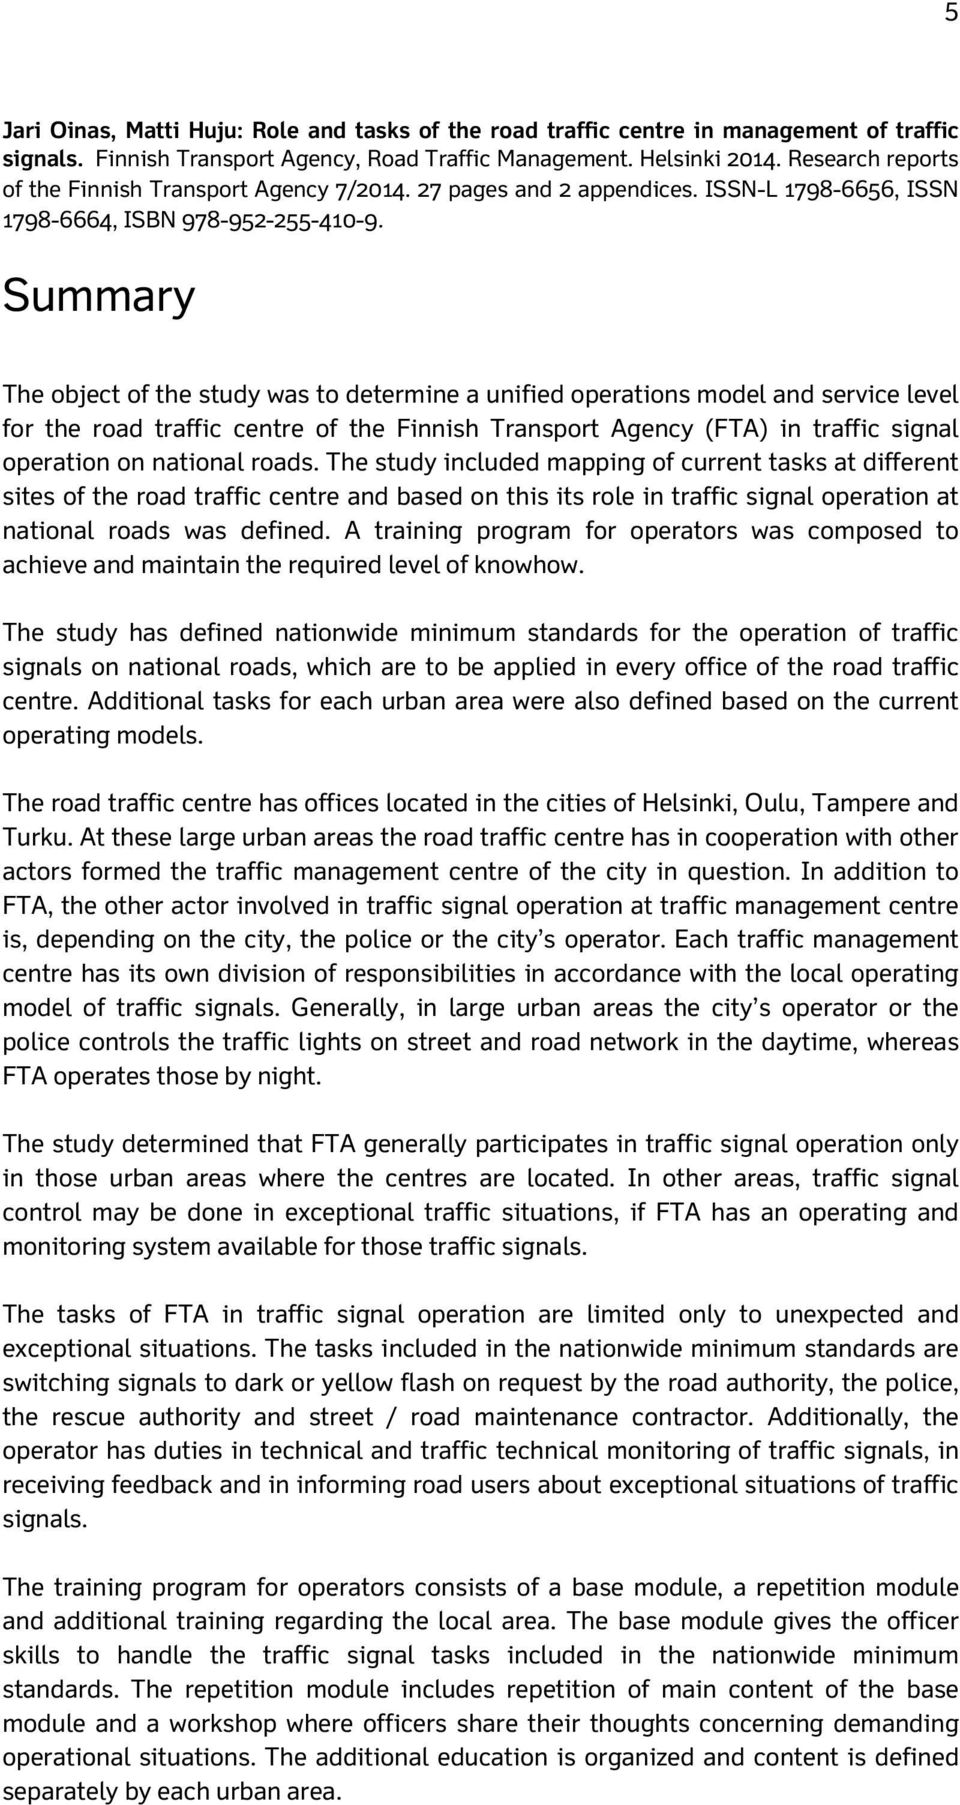 Summary The object of the study was to determine a unified operations model and service level for the road traffic centre of the Finnish Transport Agency (FTA) in traffic signal operation on national